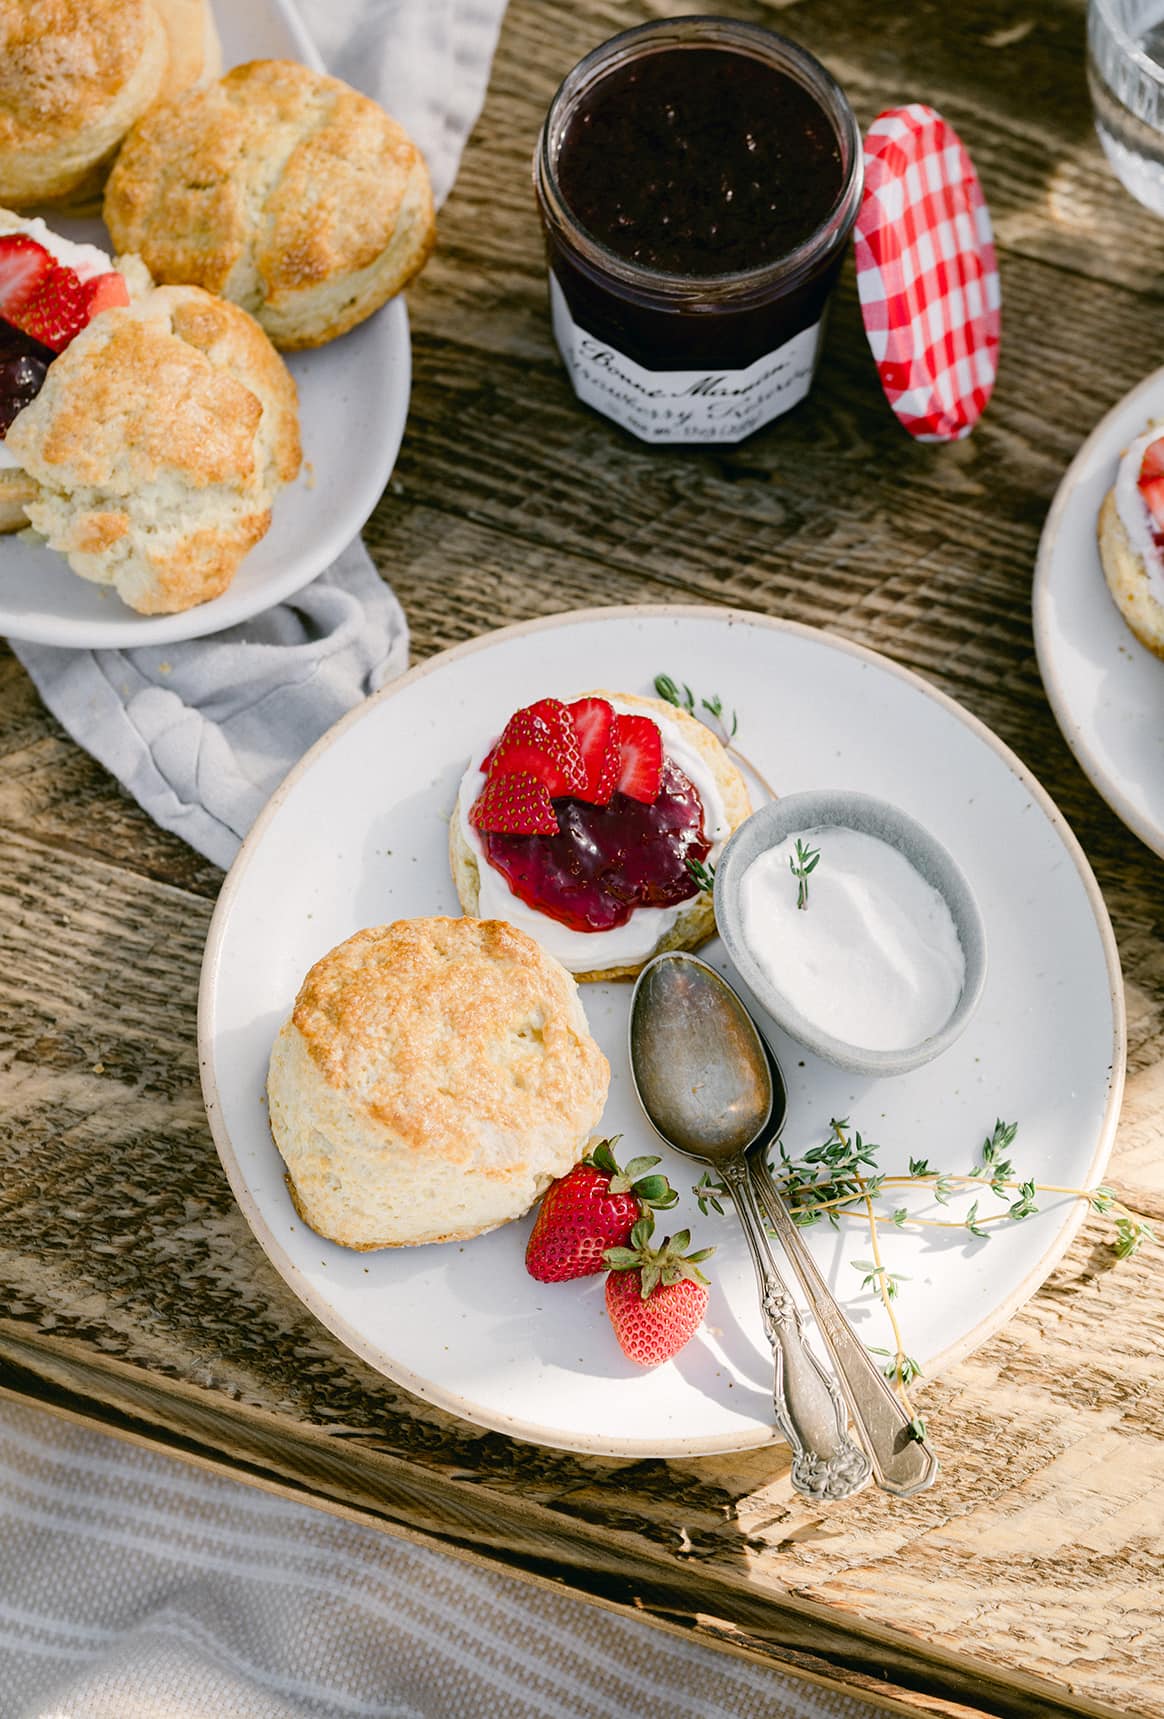 Buttery strawberry shortcakes filled with creamy whipped labneh and strawberry preserves. The perfect dessert to enjoy on an afternoon picnic!